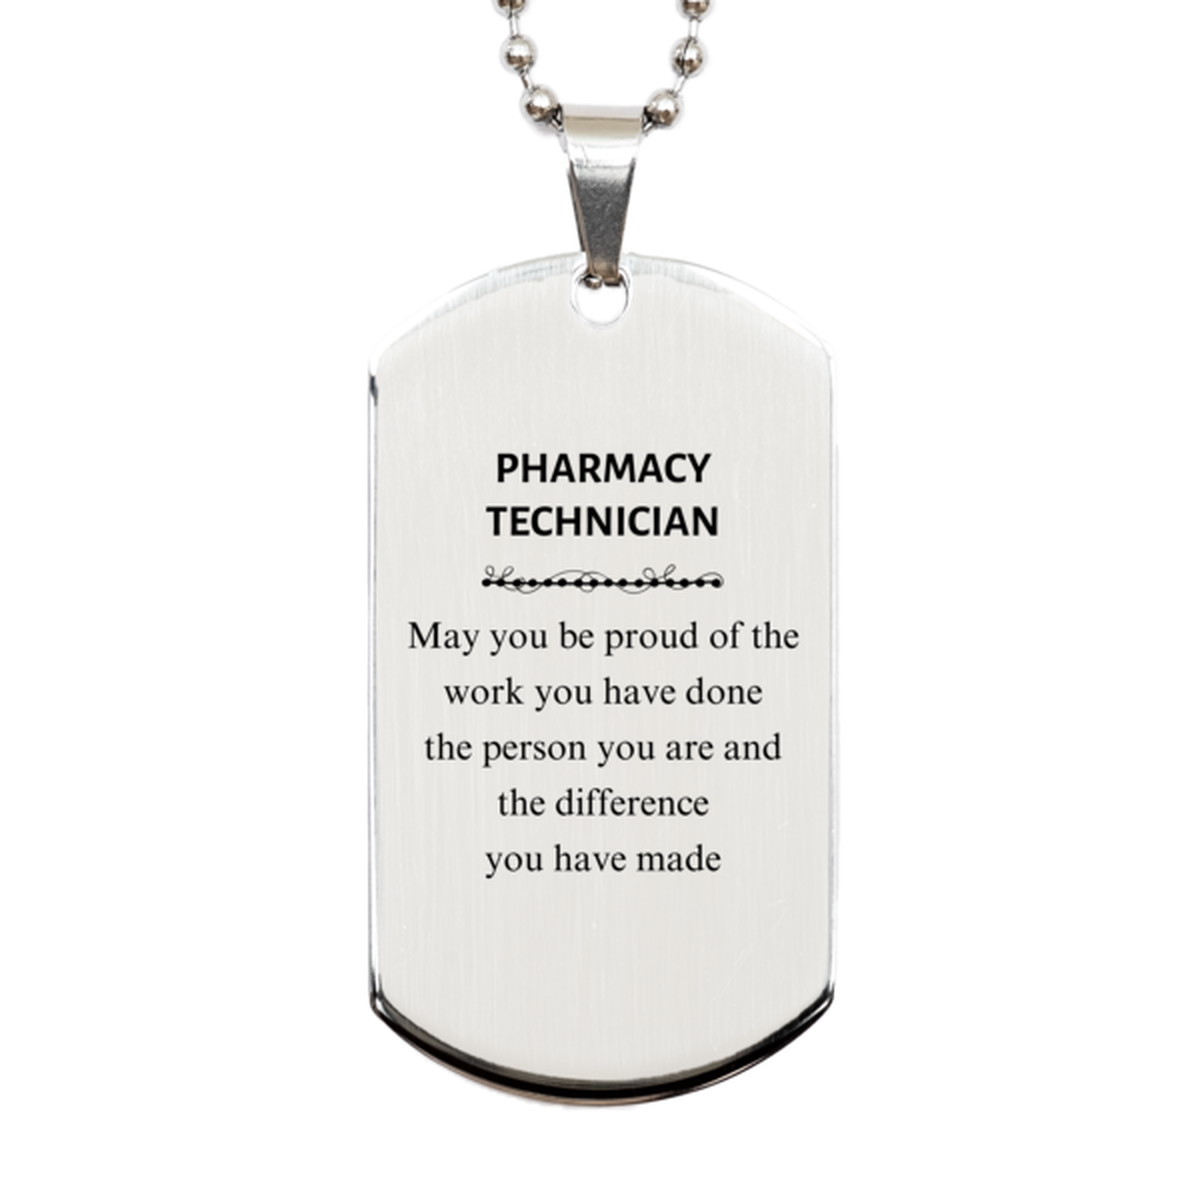 Pharmacy Technician May you be proud of the work you have done, Retirement Pharmacy Technician Silver Dog Tag for Colleague Appreciation Gifts Amazing for Pharmacy Technician